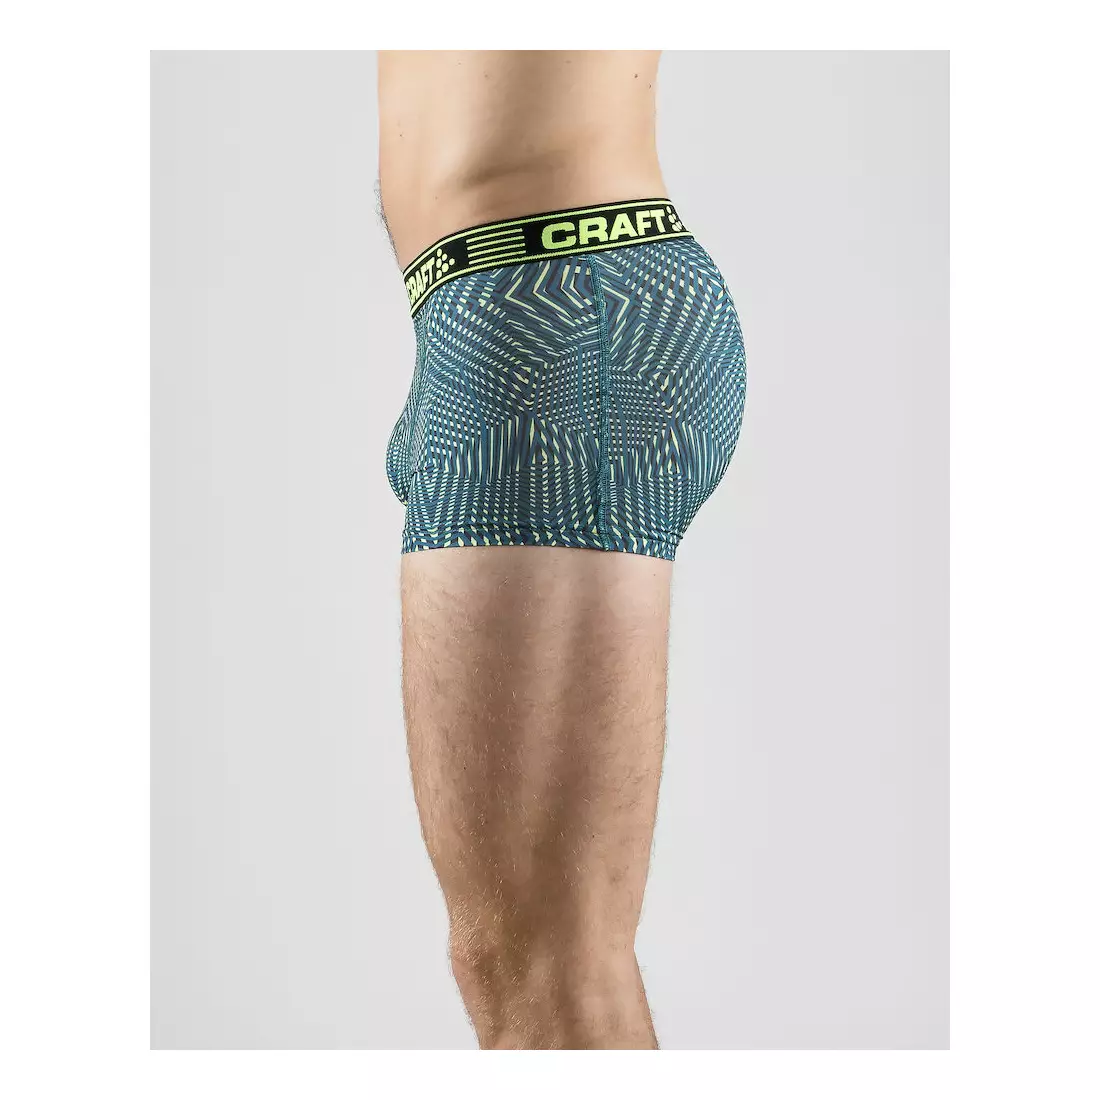 CRAFT men's sports boxer shorts 3-INCH 1905488-9657